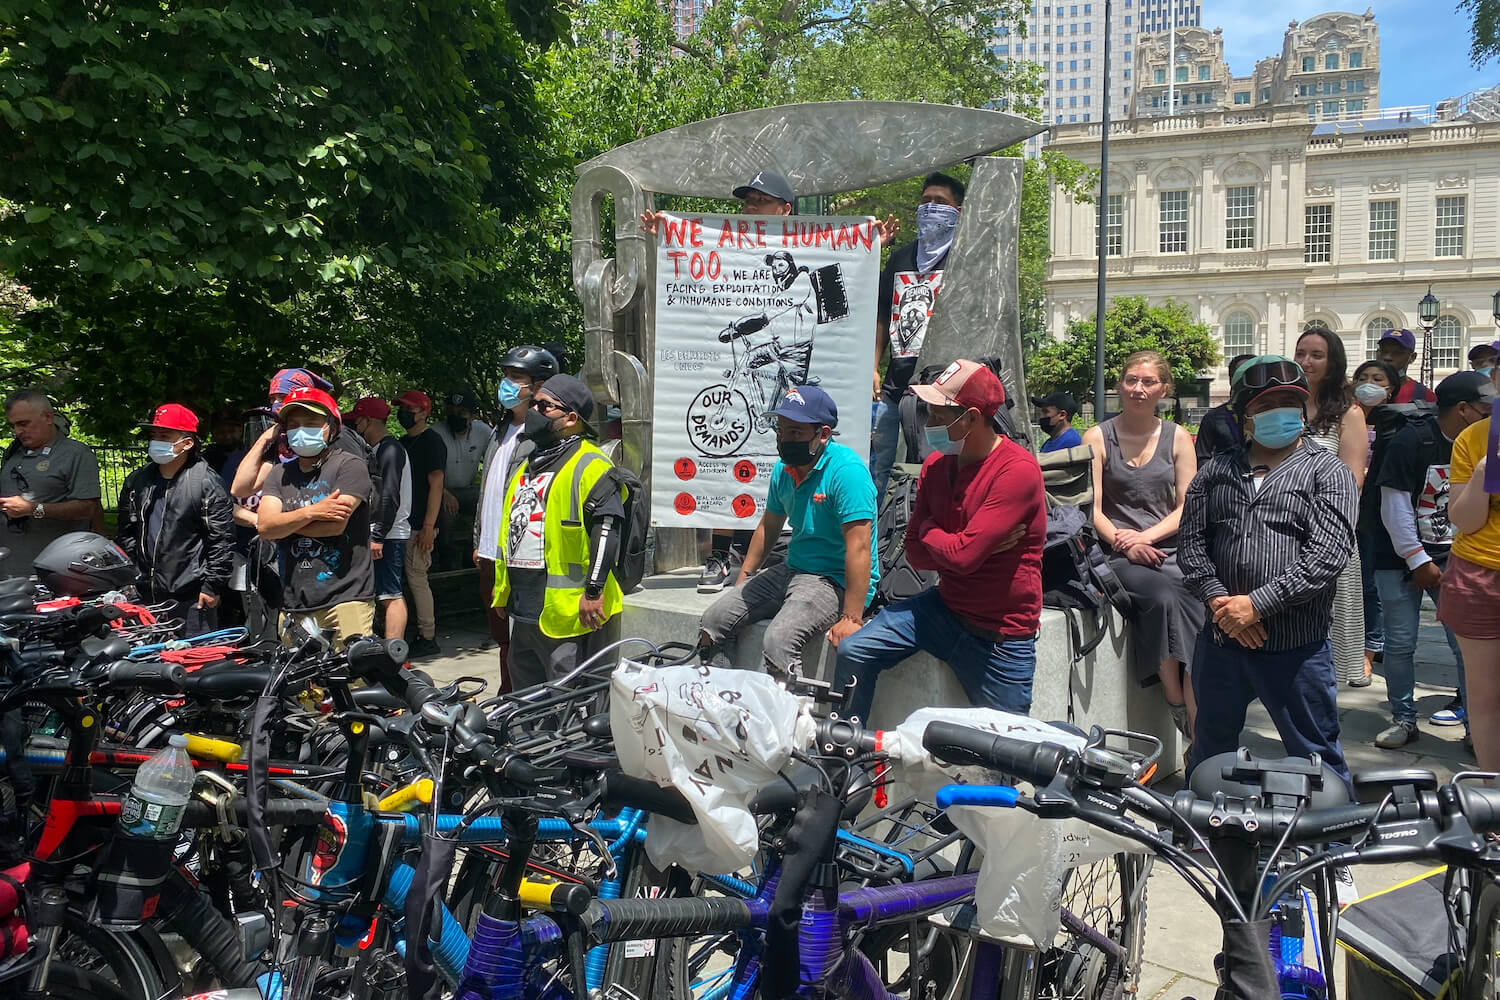 Delivery workers rallied outside City Hall while the City Council debated ways to aid them, June 8, 2021. September 2021